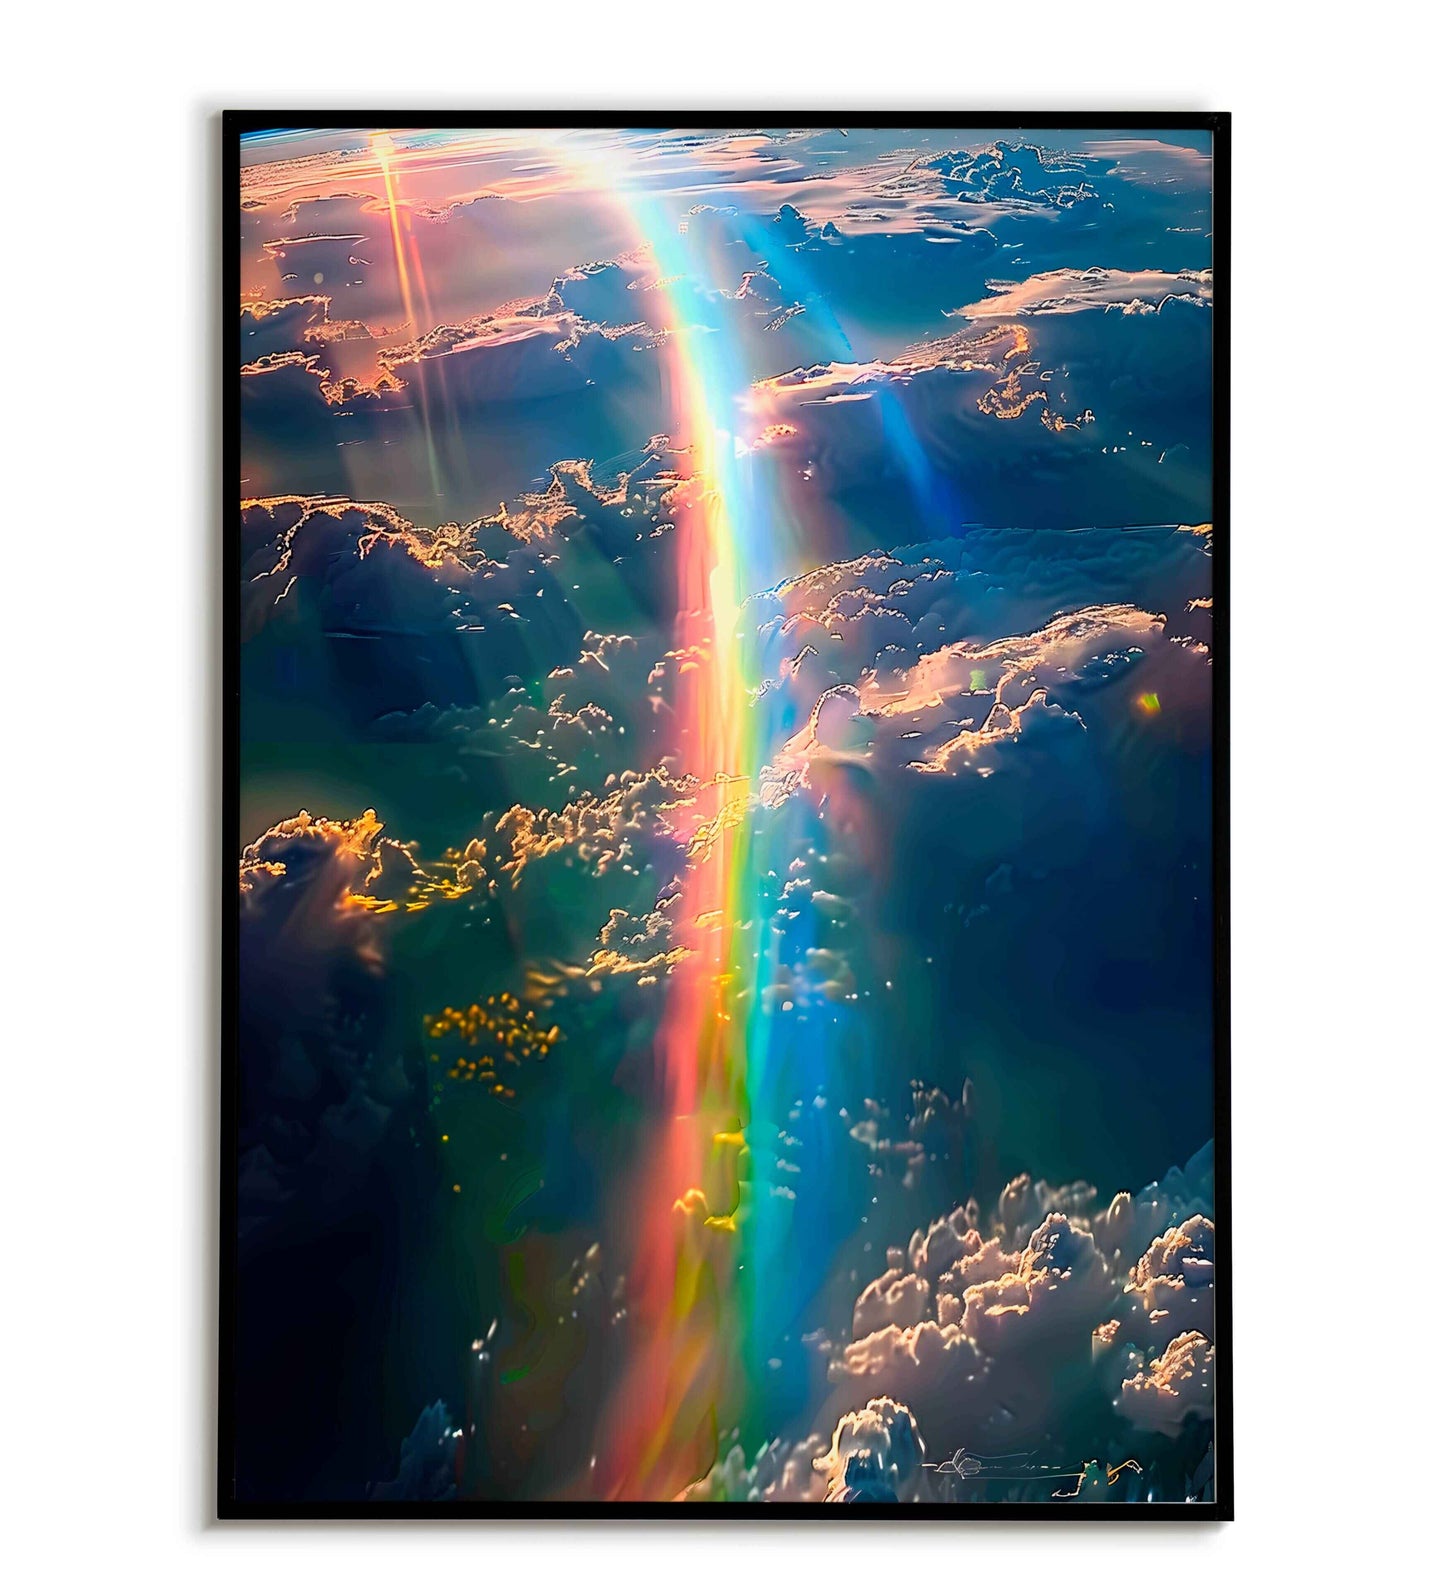 Surreal Rainbow(2 of 2) printable poster with a whimsical touch. Available for purchase as a physical poster or digital download.